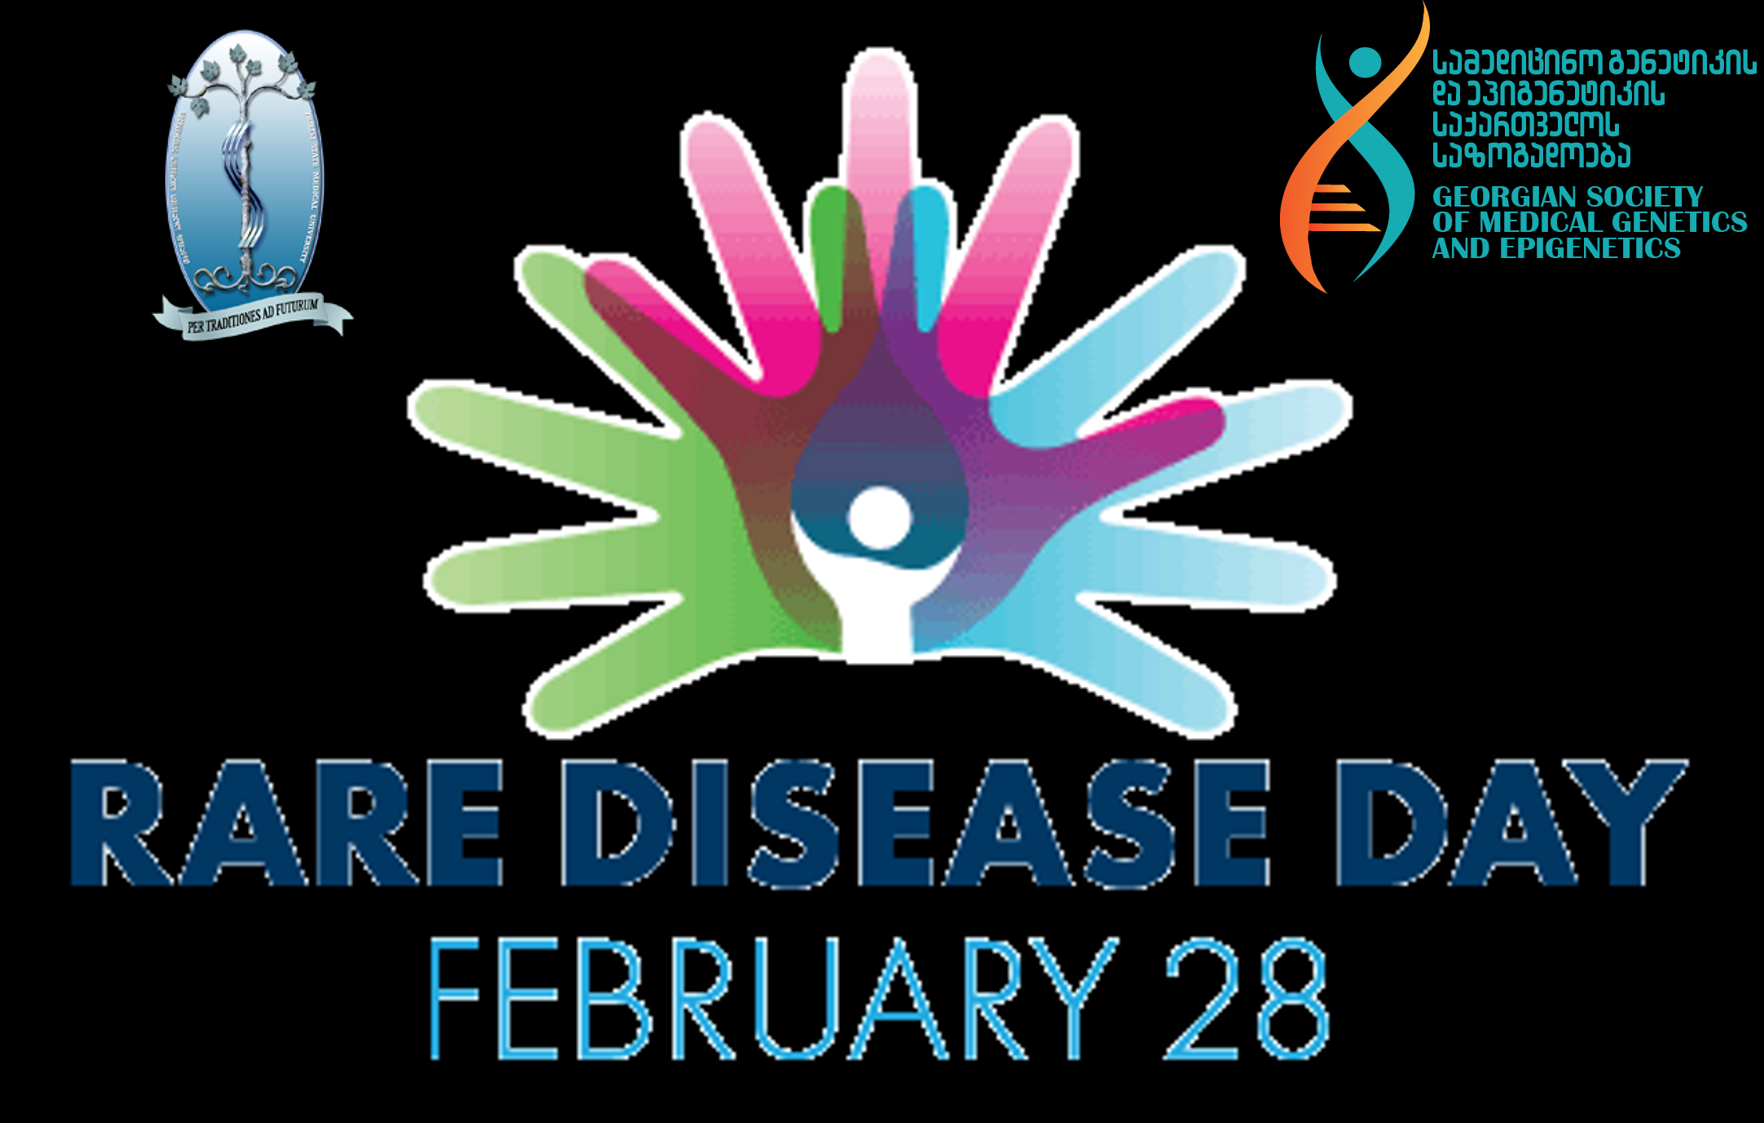 Conference Dedicated to the International Rare Disease Day